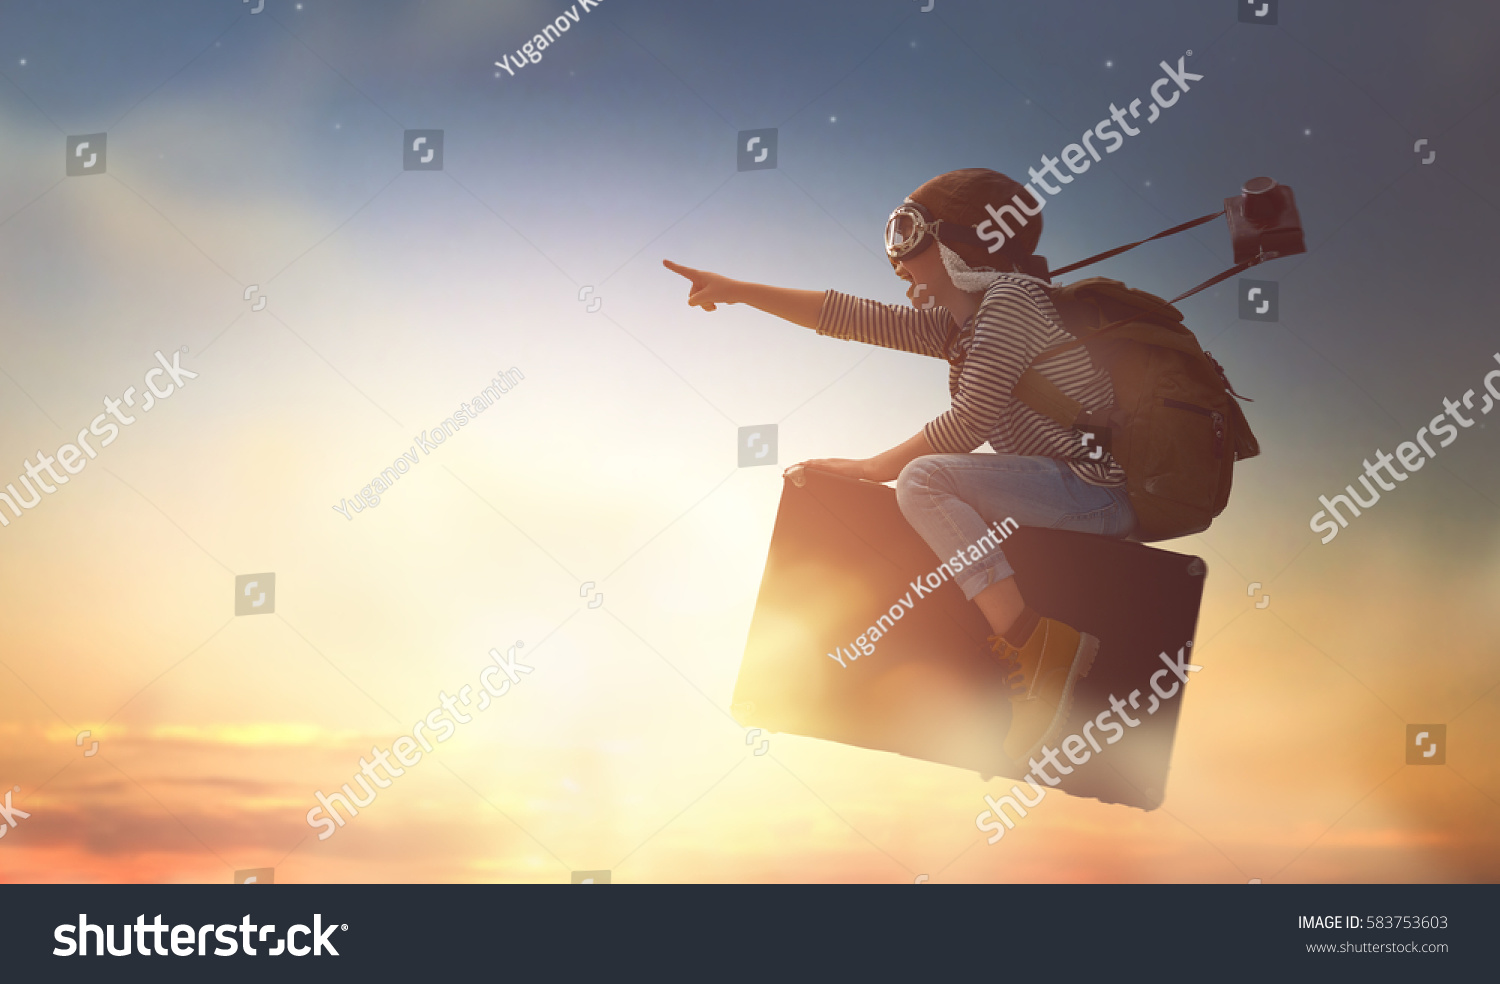 Dreams of travel! Child flying on a suitcase against the backdrop of sunset. #583753603